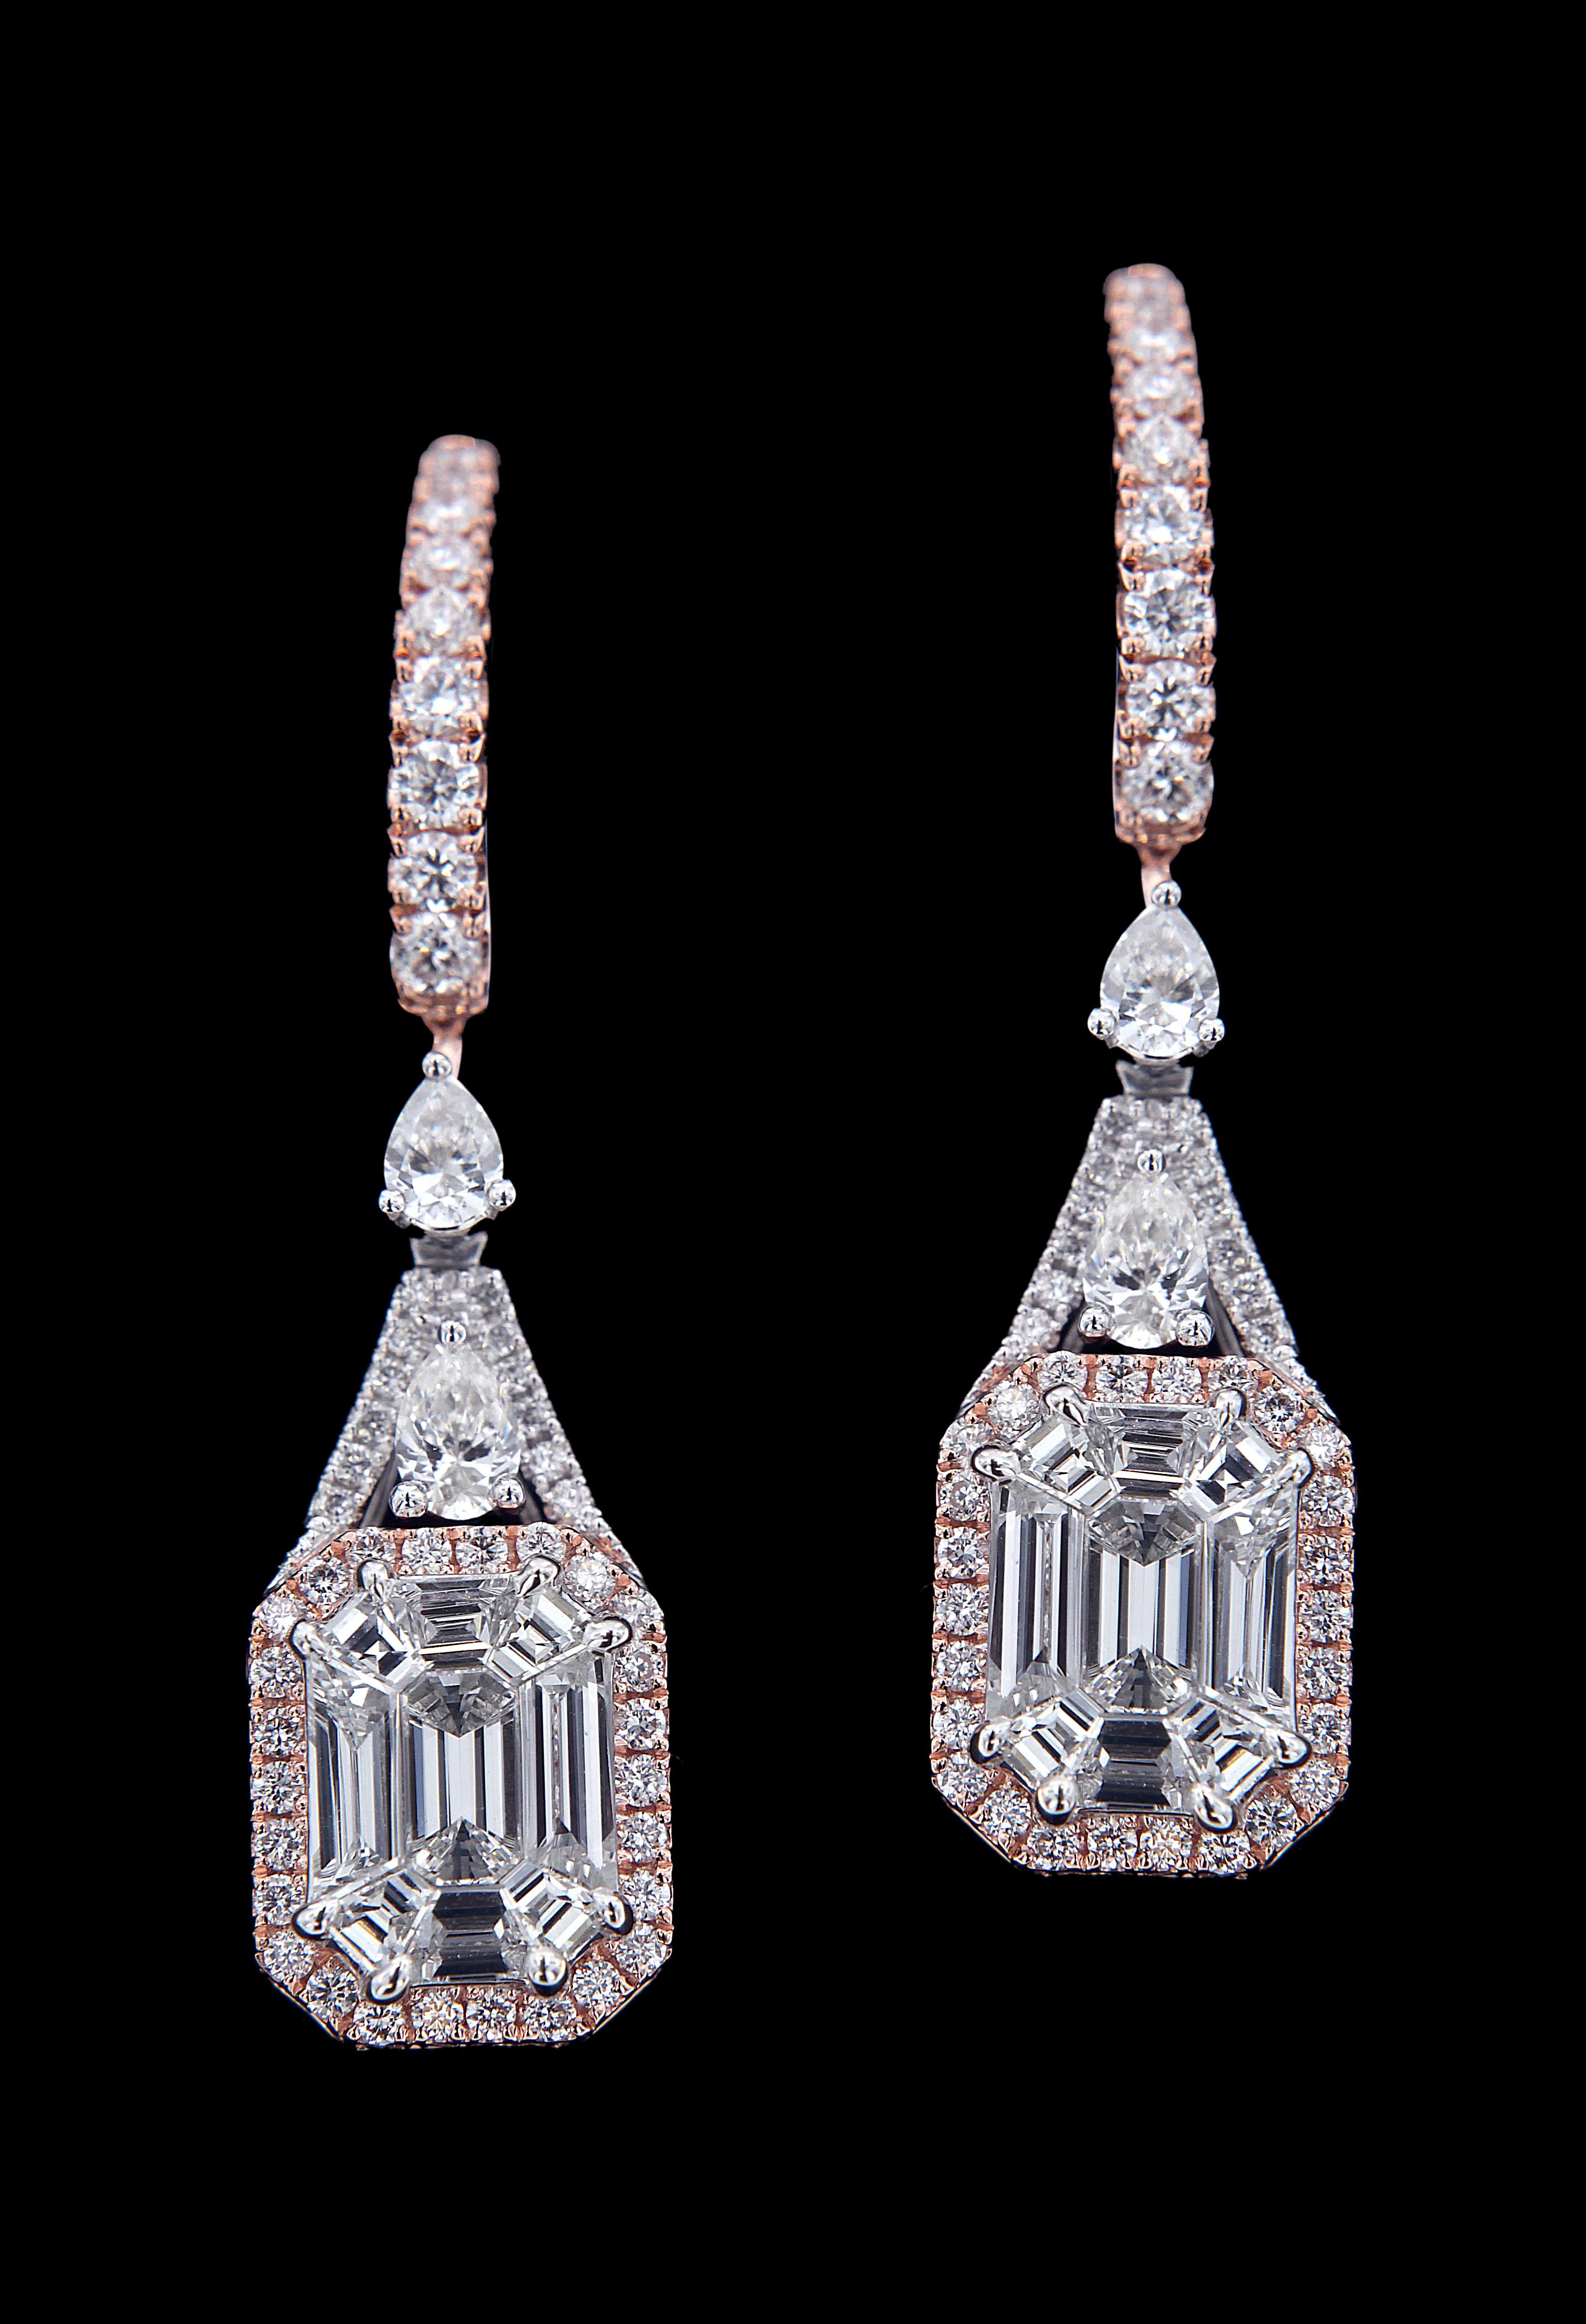 Designer 18 Karat Pink Gold and Diamond Earrings.

Diamonds of approximately 2.481 carats and mounted on 18 karats pink gold earrings. The earrings weigh approximately 7.084 grams.

Please note: The charges specified do not include any shipment,